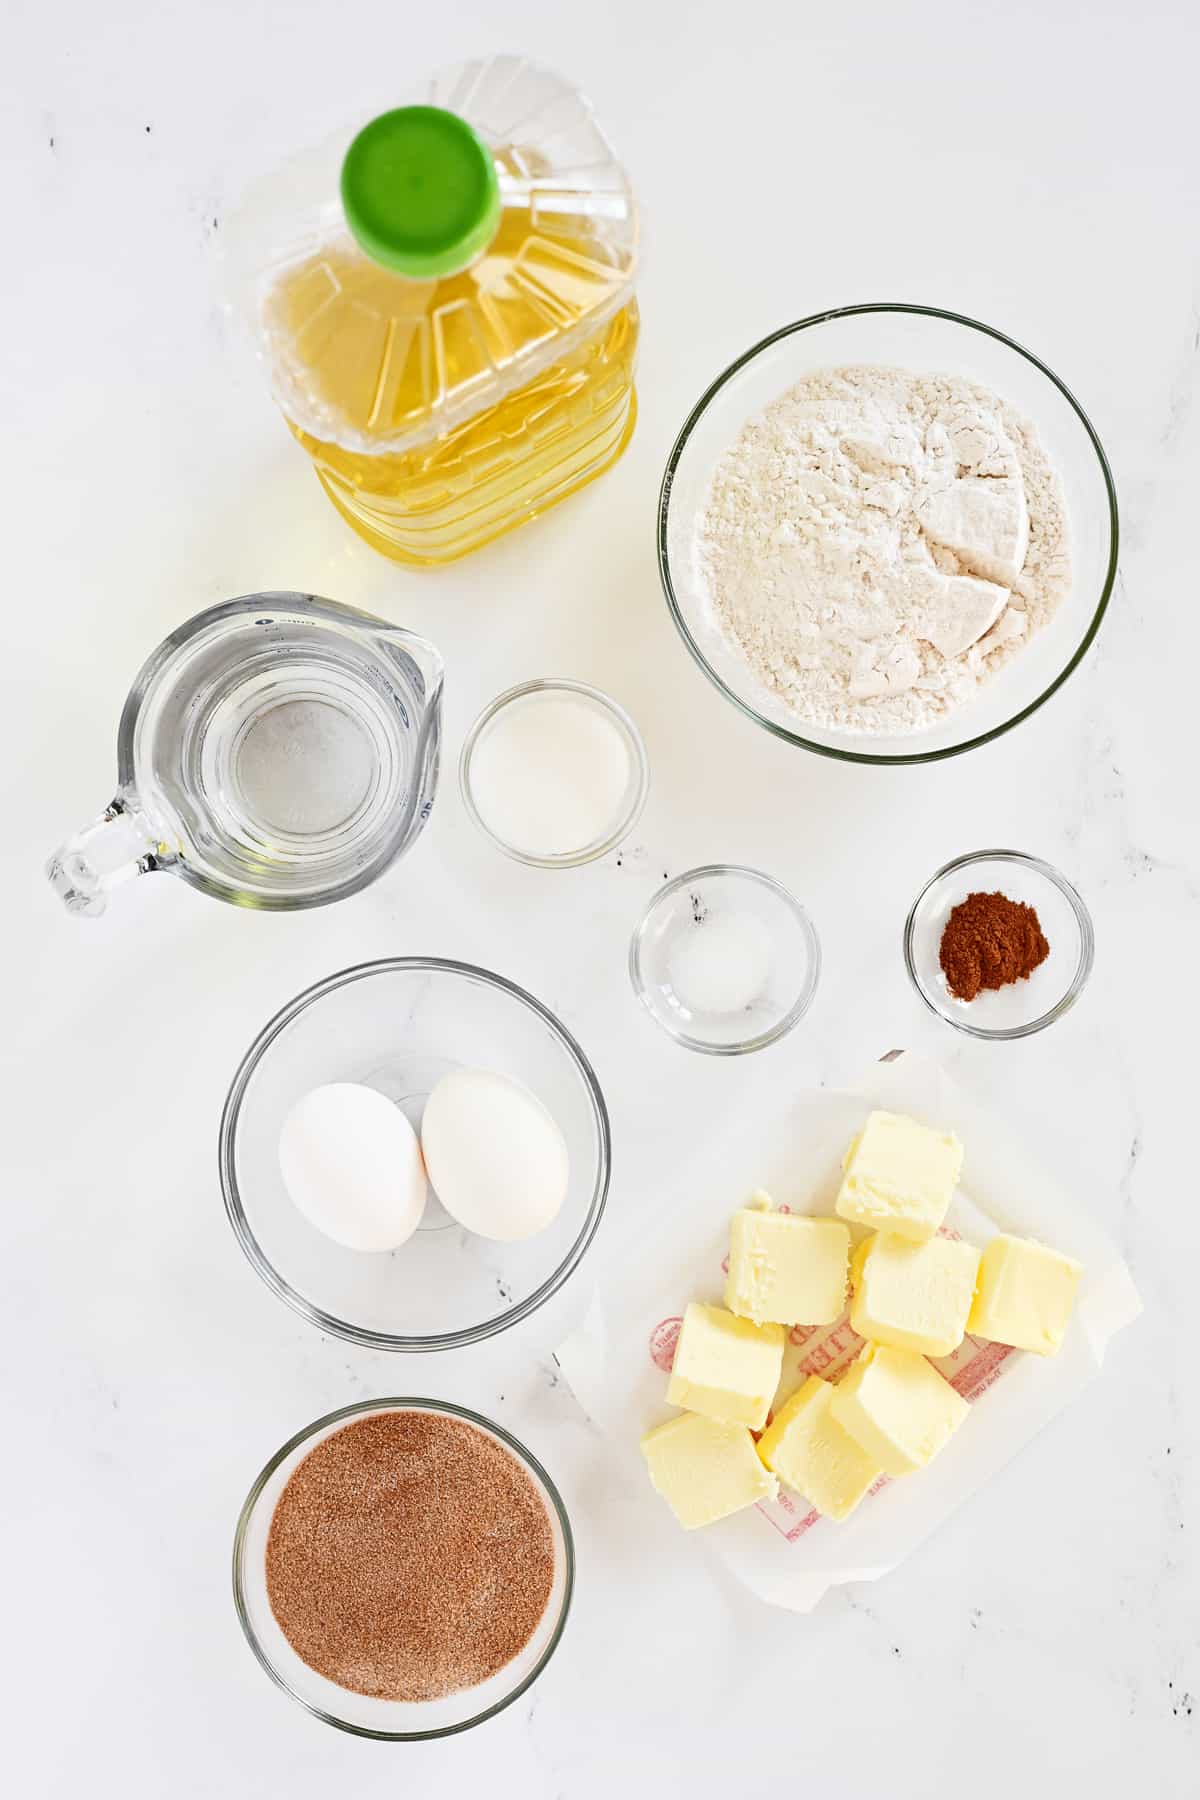 ingredients set out on a countertop.